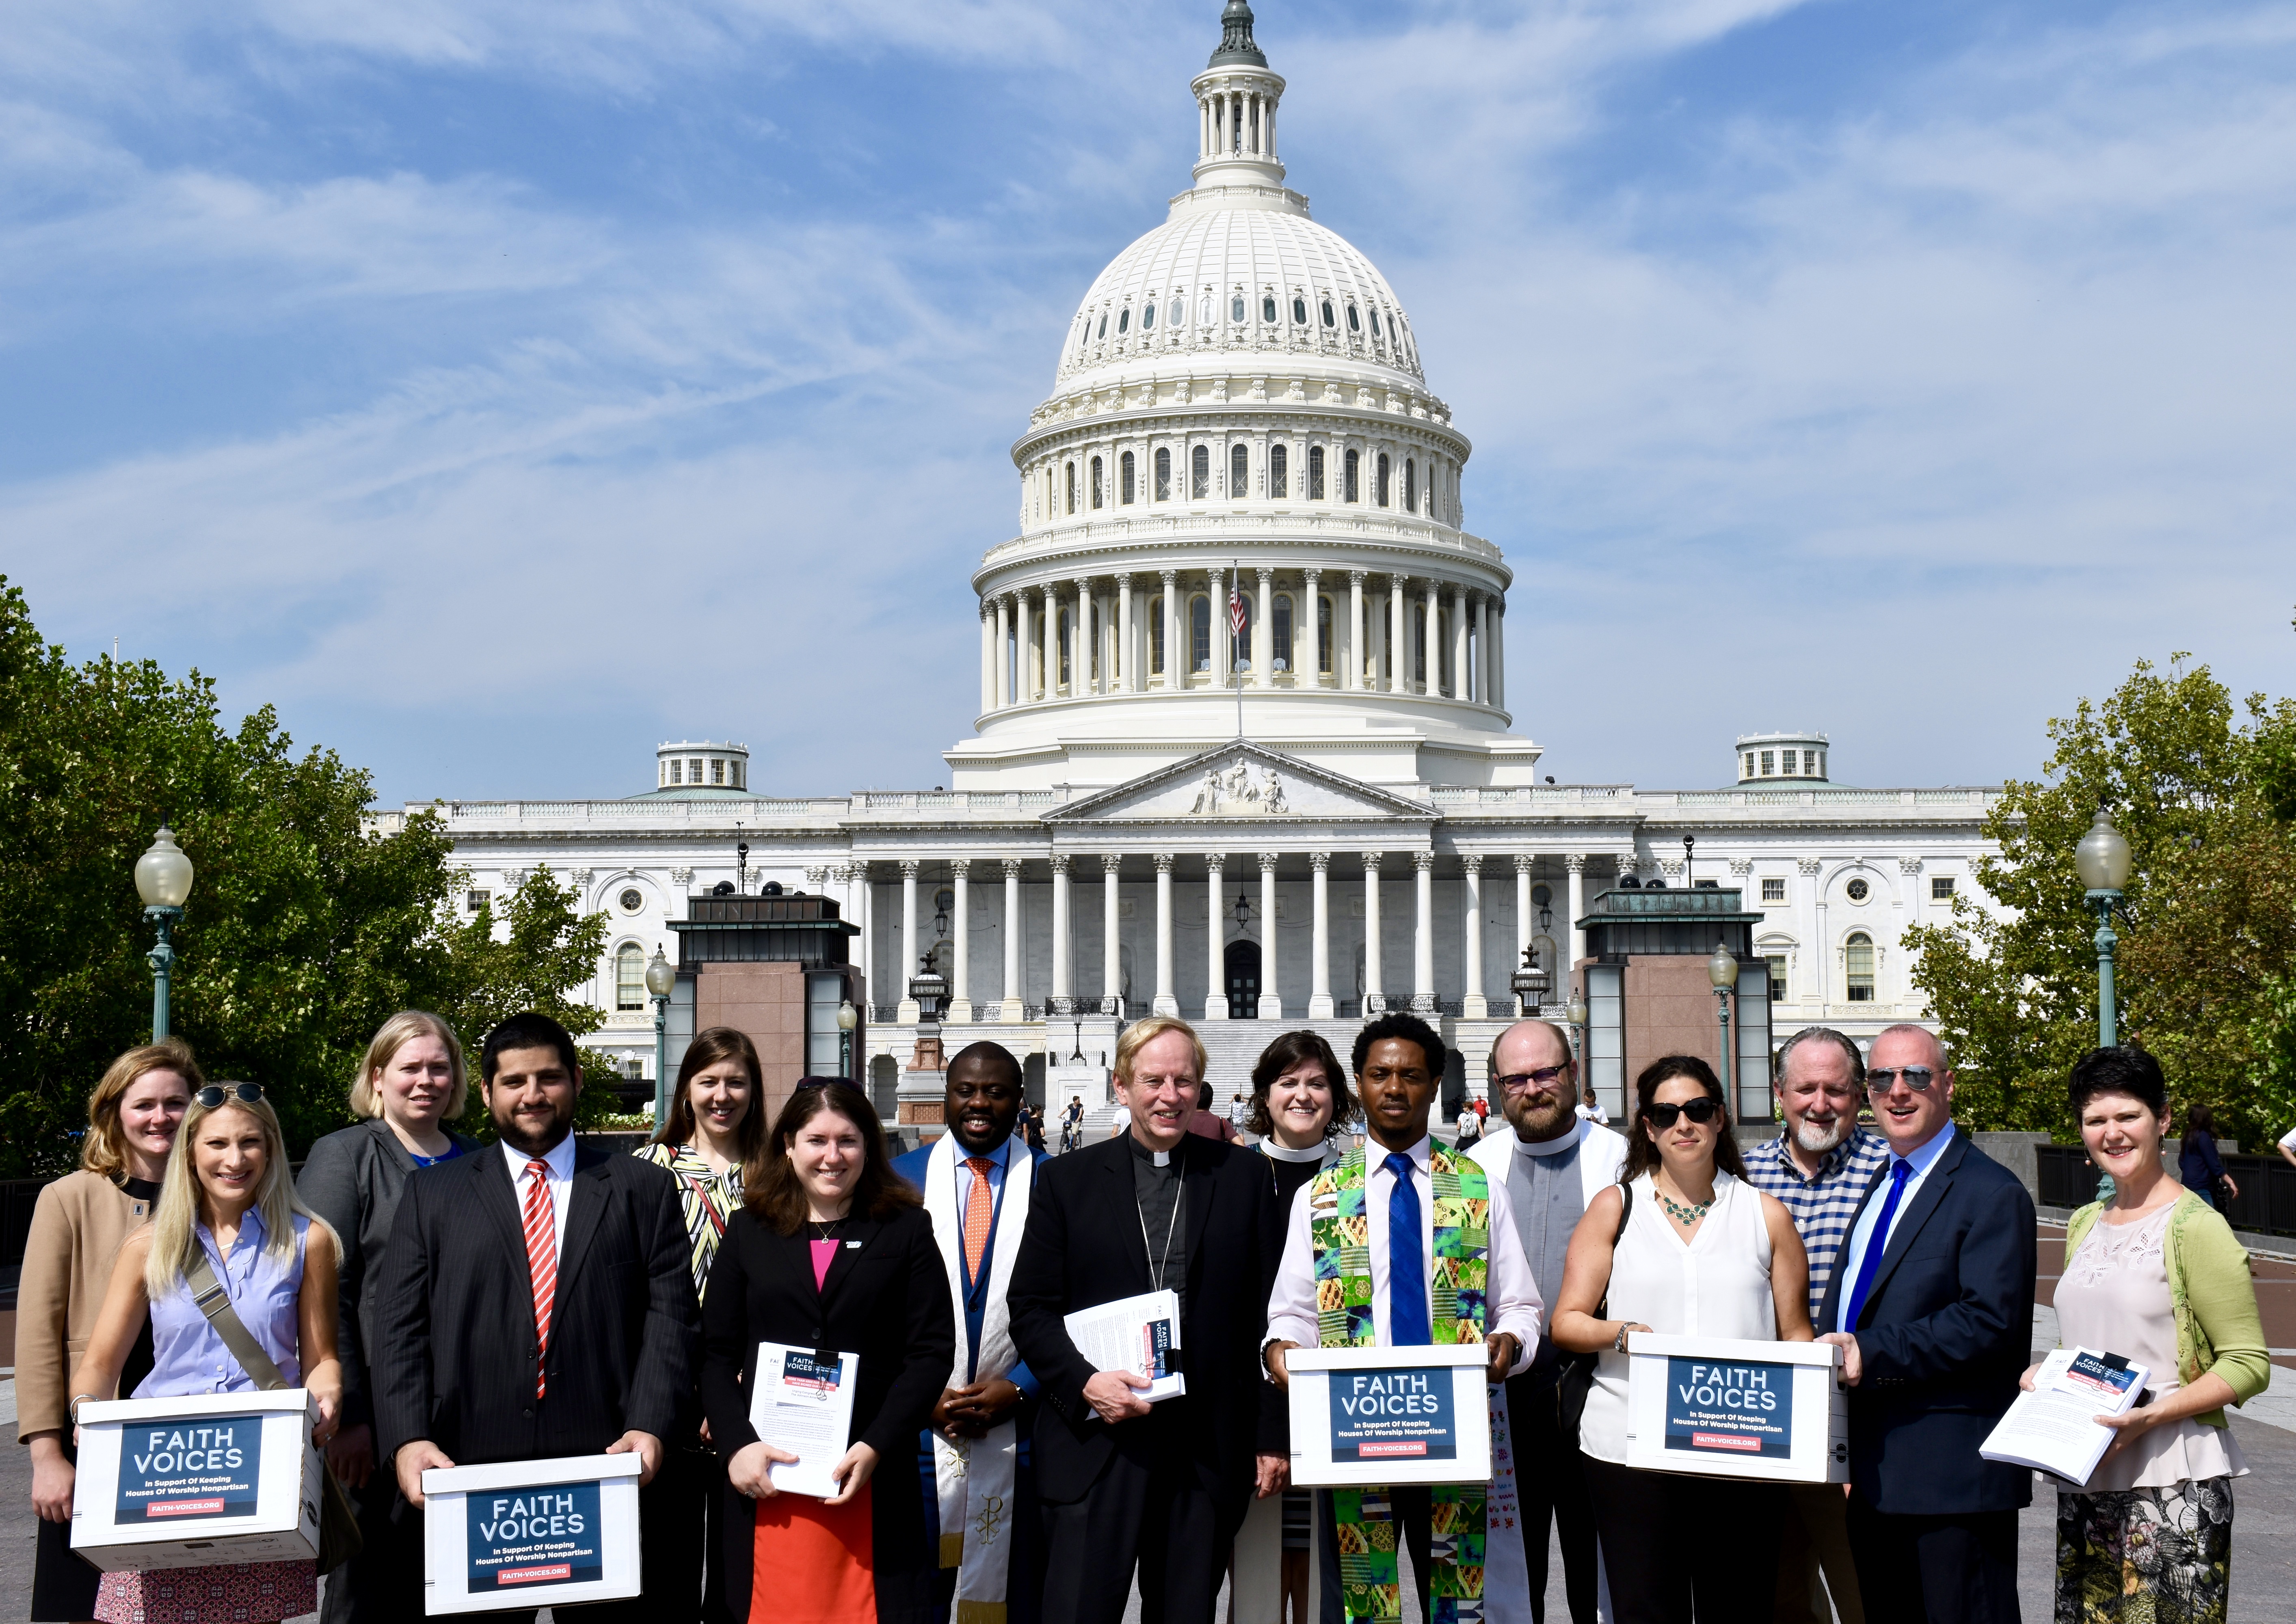 Faith leaders delivering a petition to Congress in support of the Johnson Amendment